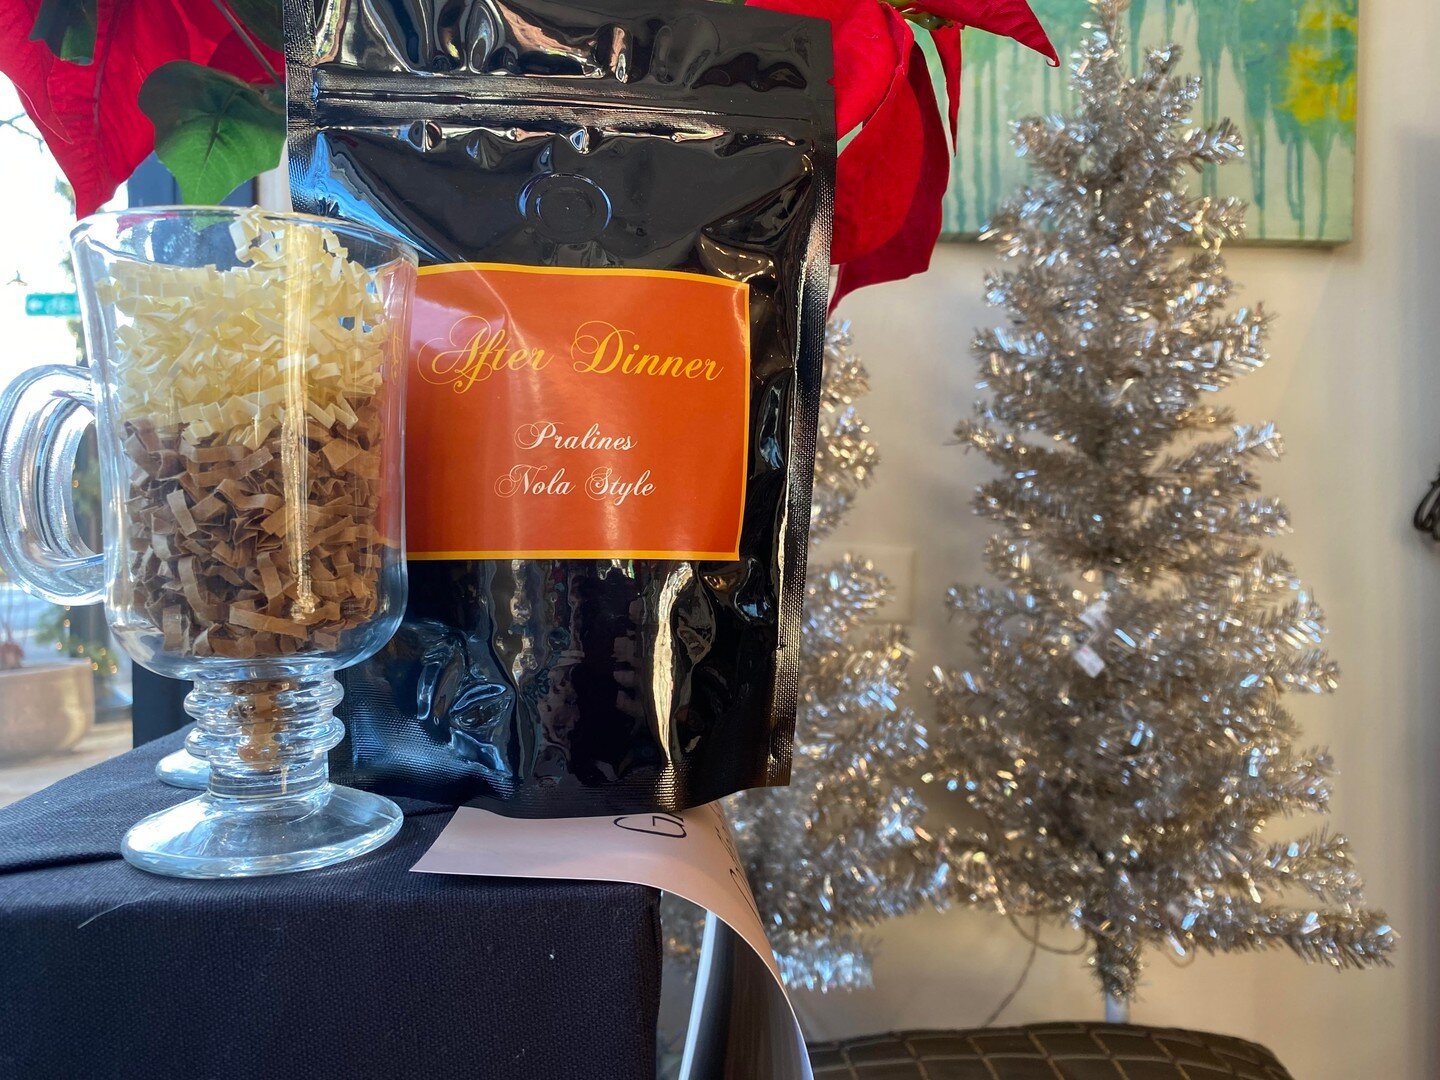 Laissez le bon temps rouler (Let the good times roll)!

Shop for holiday coffees now at grndcoffeehouse.com

#oakpark #coffee #grnd #grndcoffeehouse #oakparkartsdistrict #harrisonstreetartsdistrict #holiday #christmas #shop #gifts